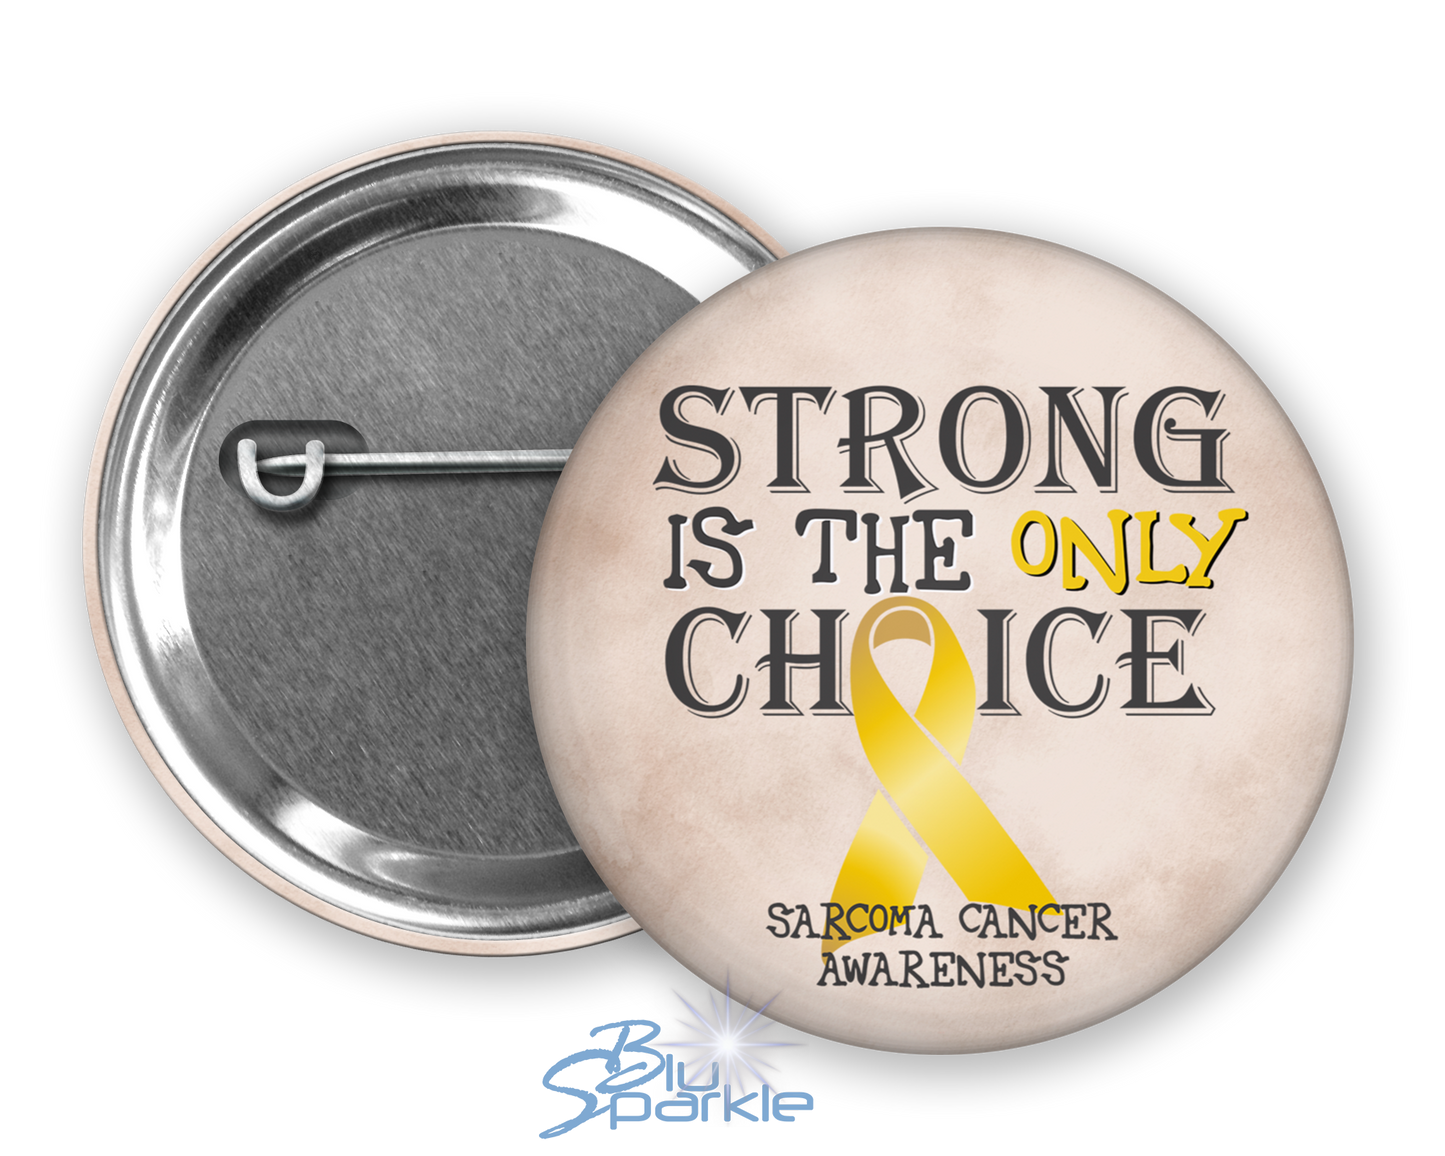 Strong is the Only Choice -Sarcoma Cancer Awareness Pinback Button |x|